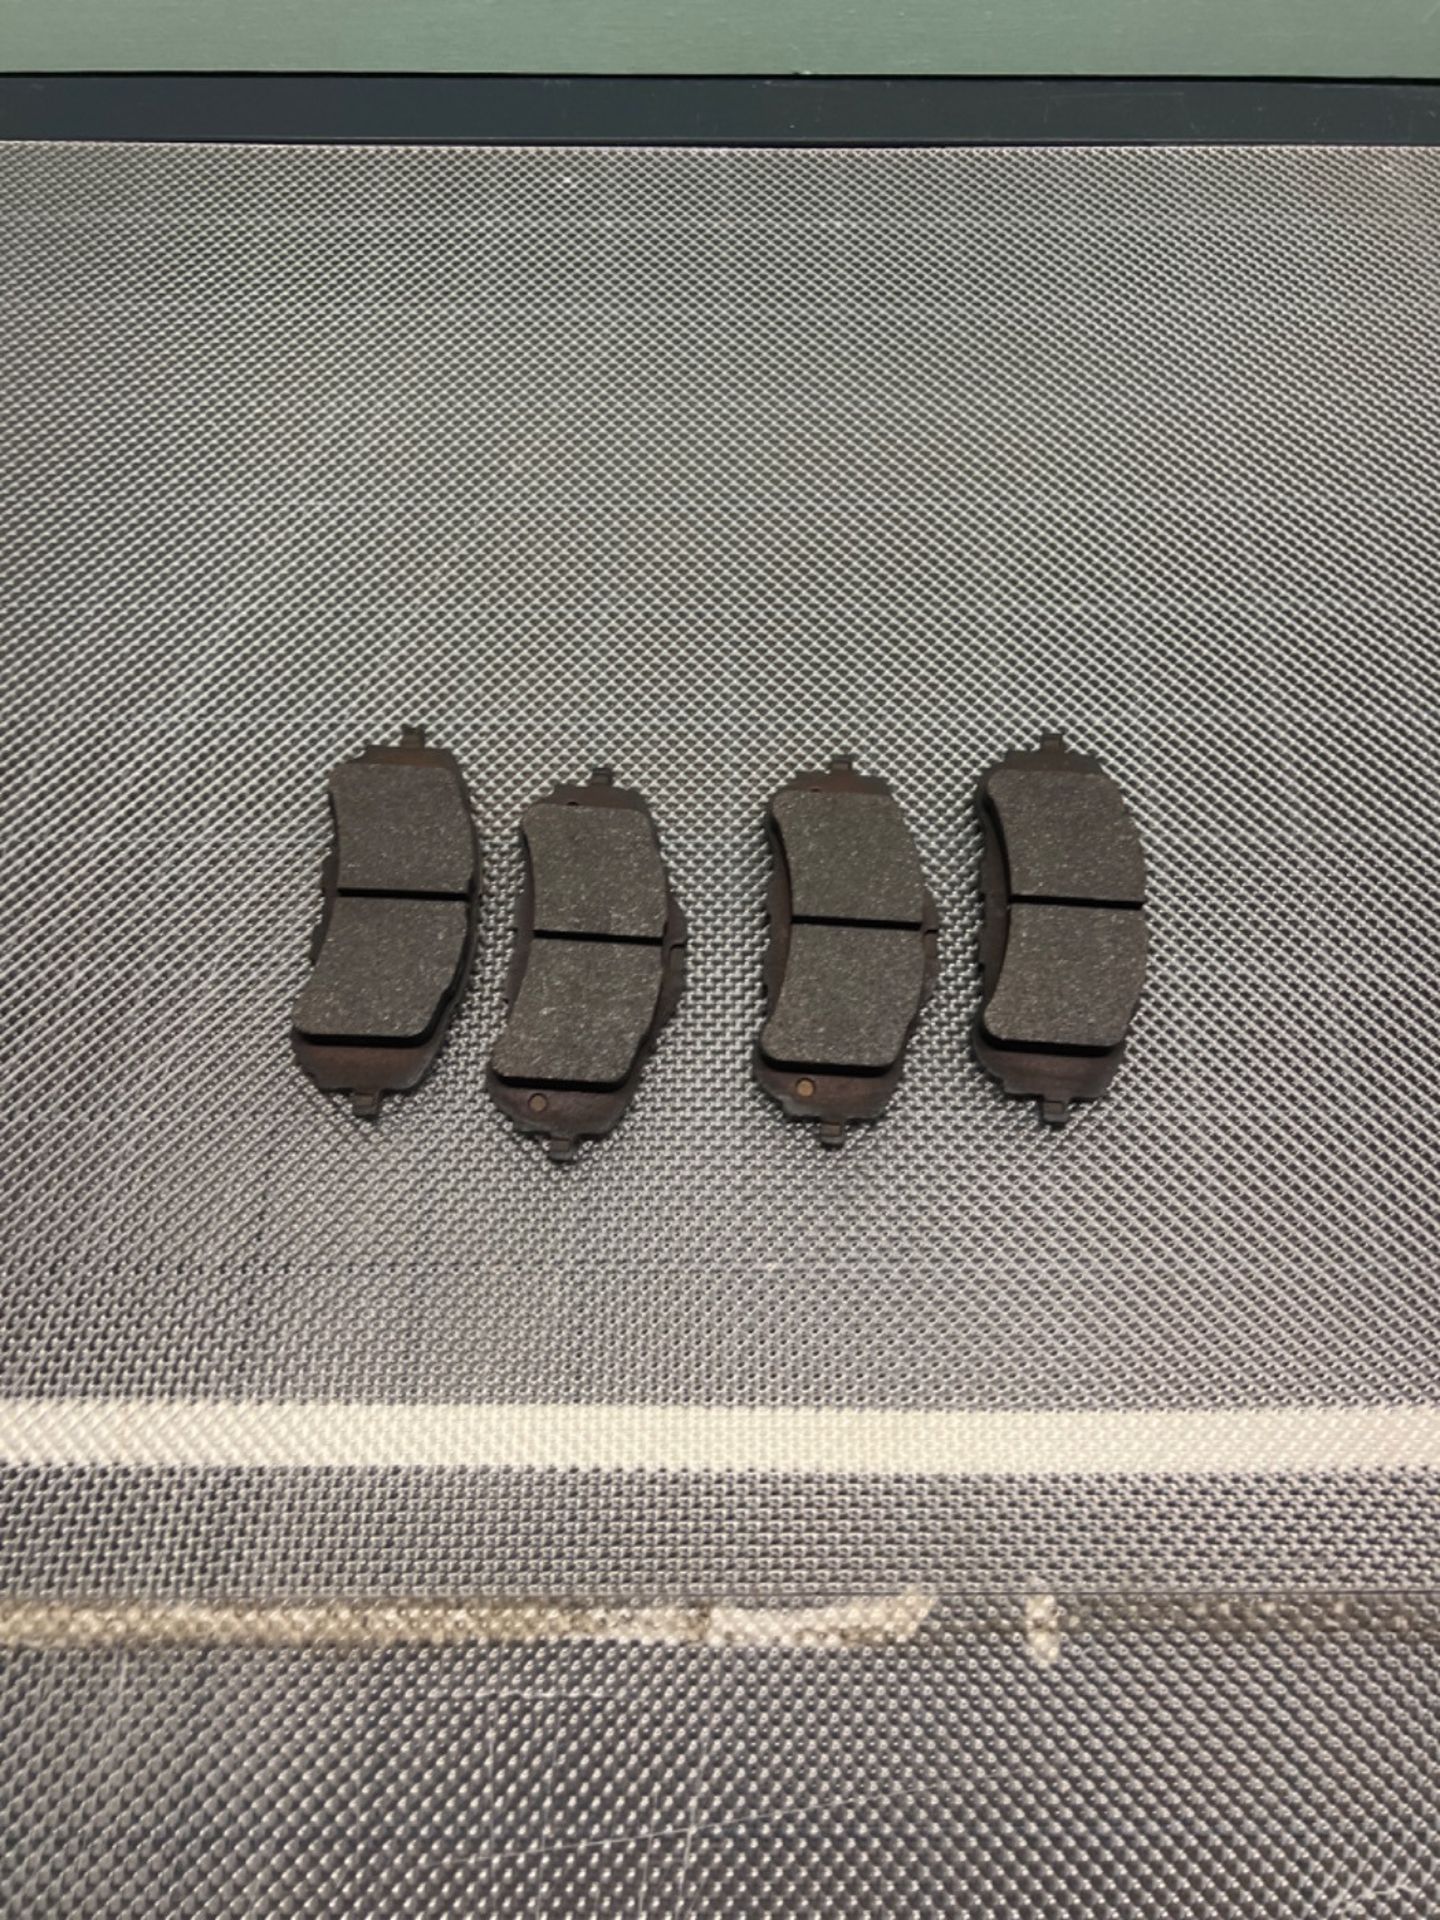 Bosch BP1709 Brake Pads - Front Axle - ECE-R90 Certified - 1 Set of 4 Pads - Image 3 of 3